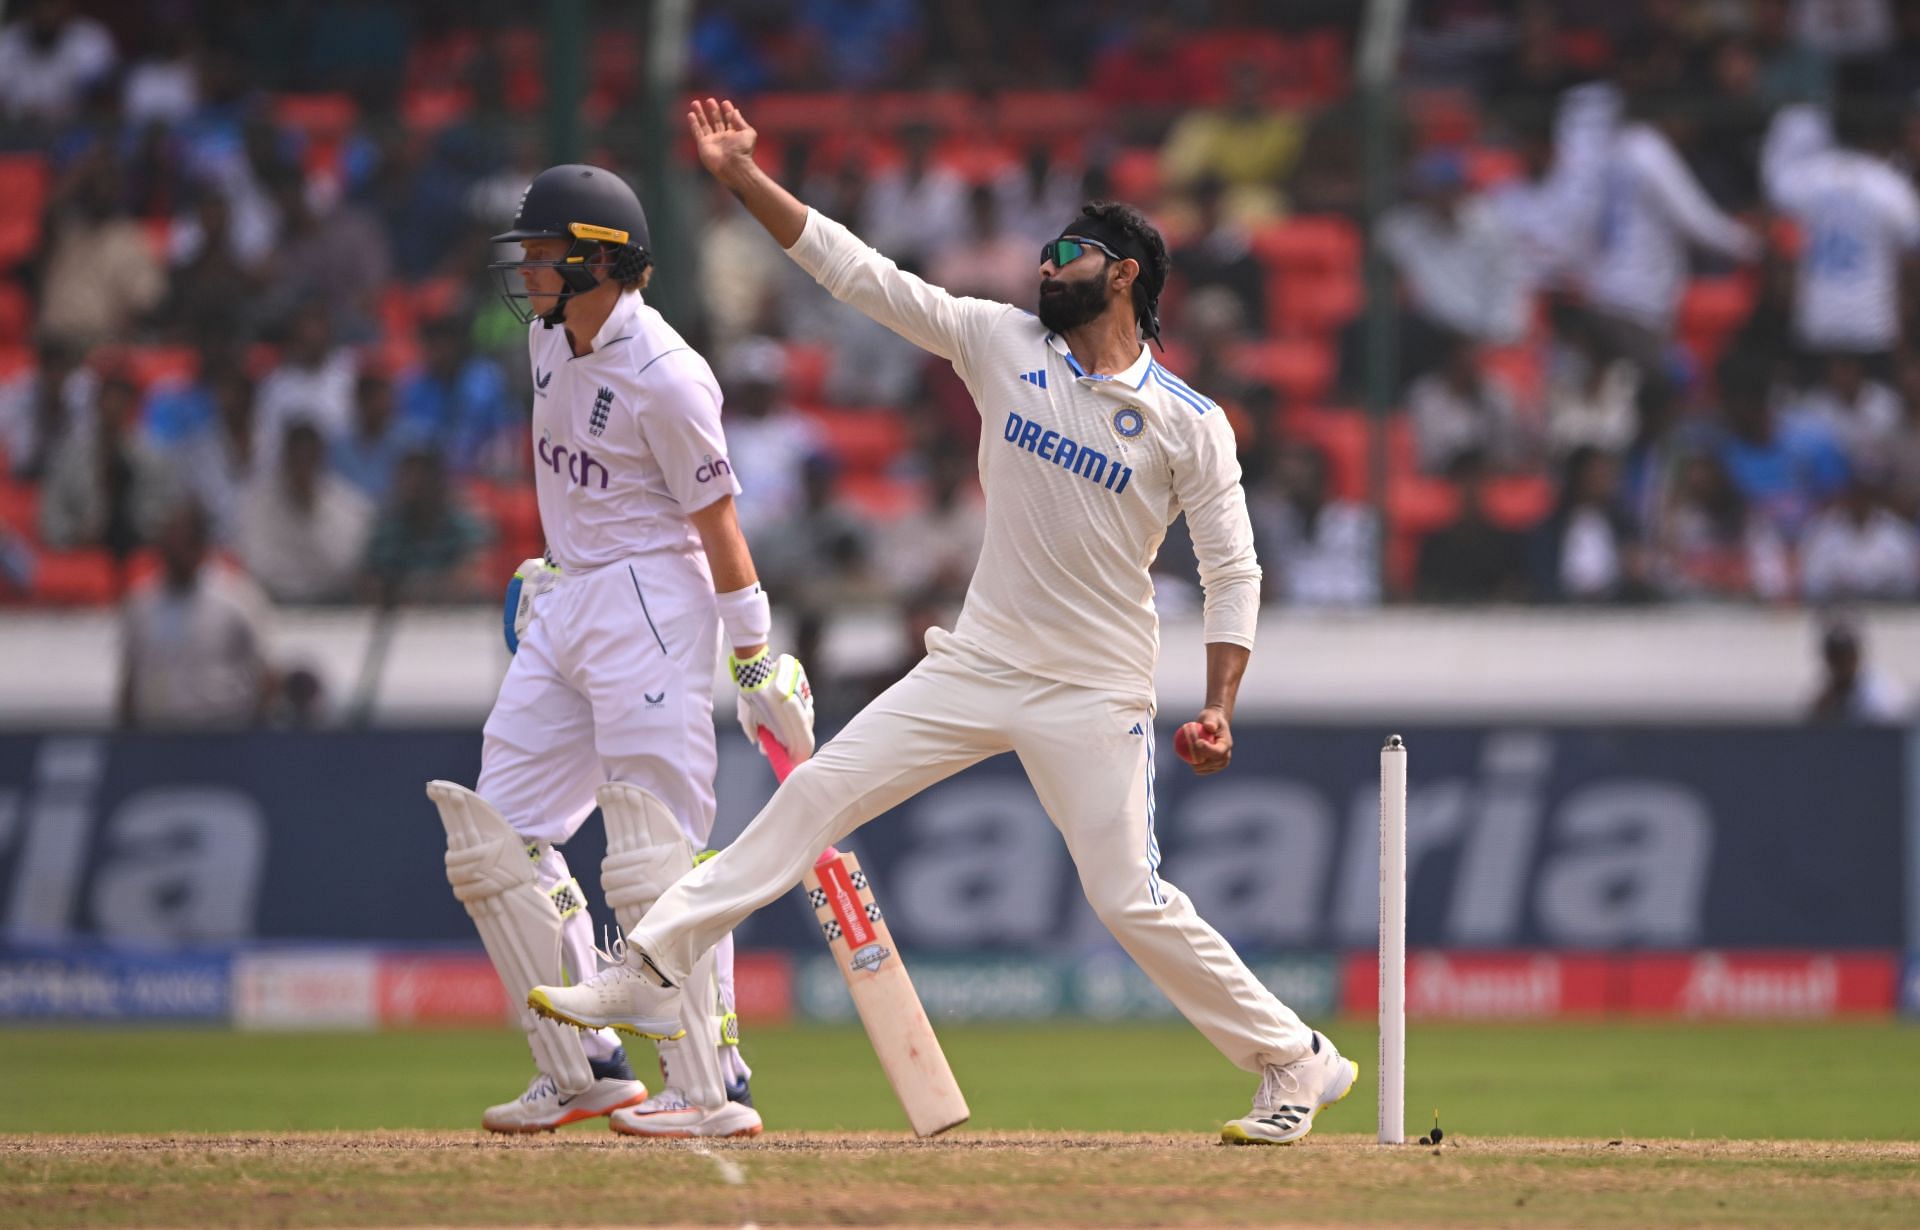 Ravindra Jadeja is set to play at his home ground in Rajkot. (Pic: Getty Images)